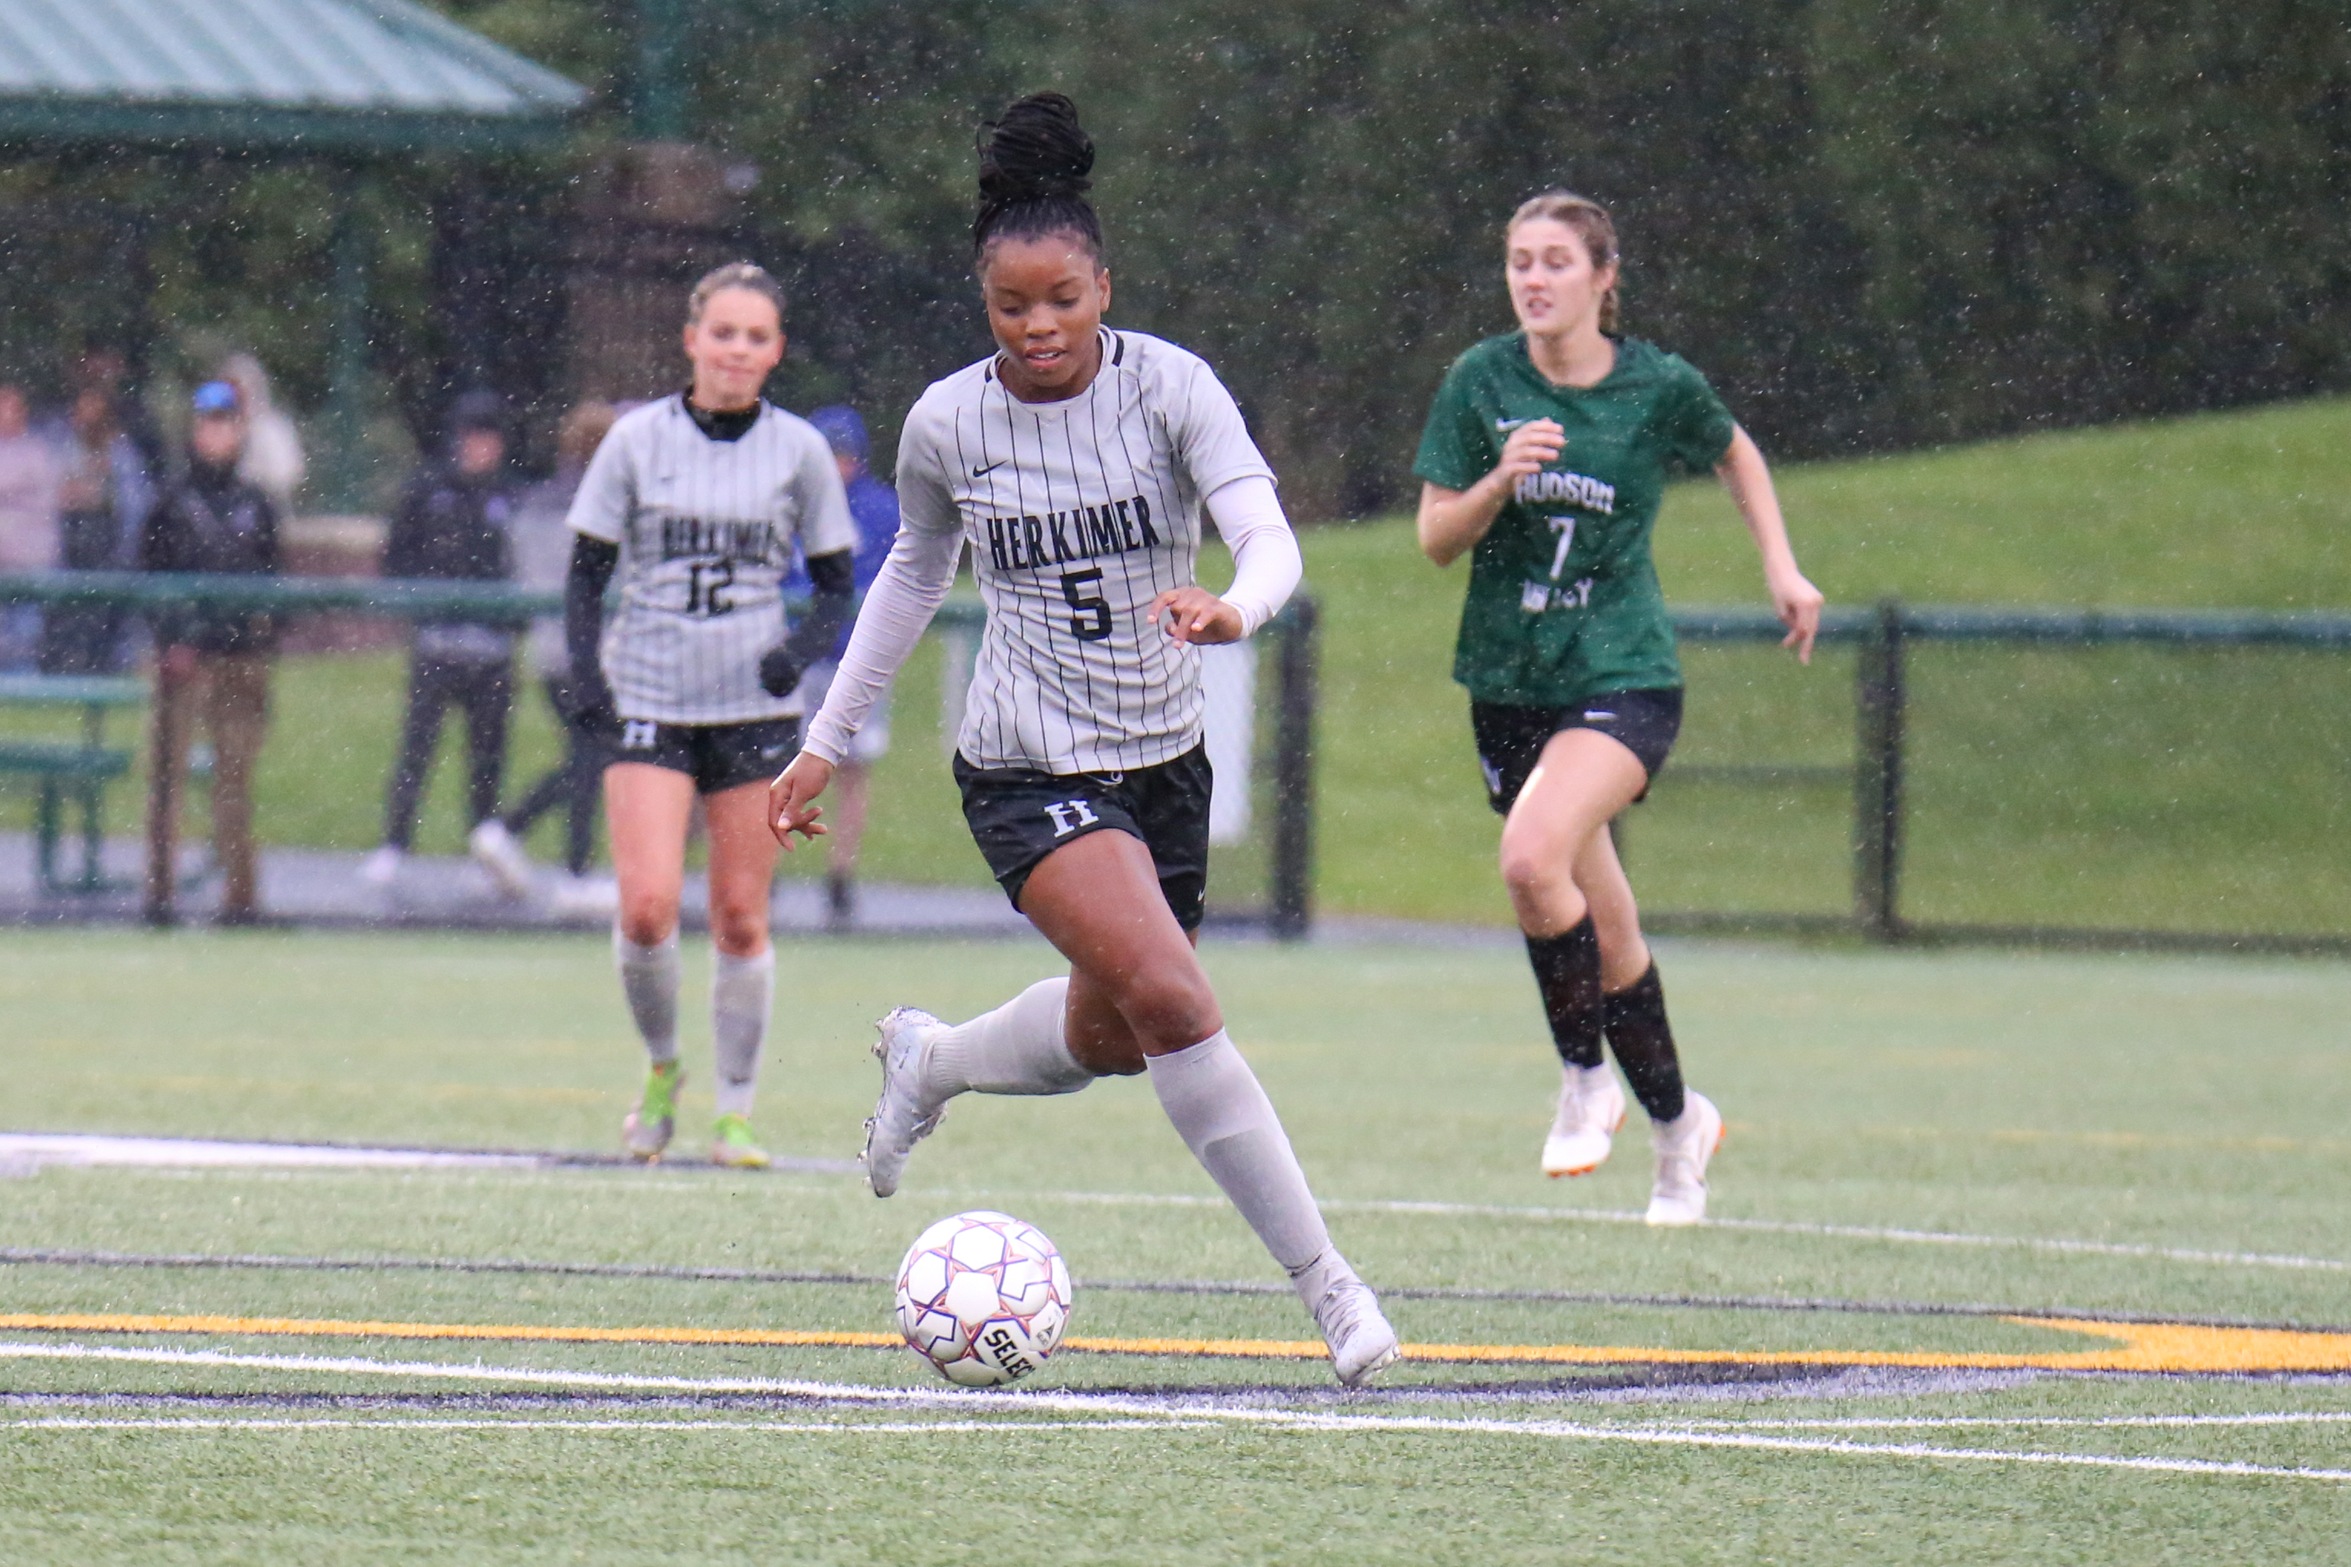 Brown's Goal Gives Generals First Win over Mohawk Valley Since 2017